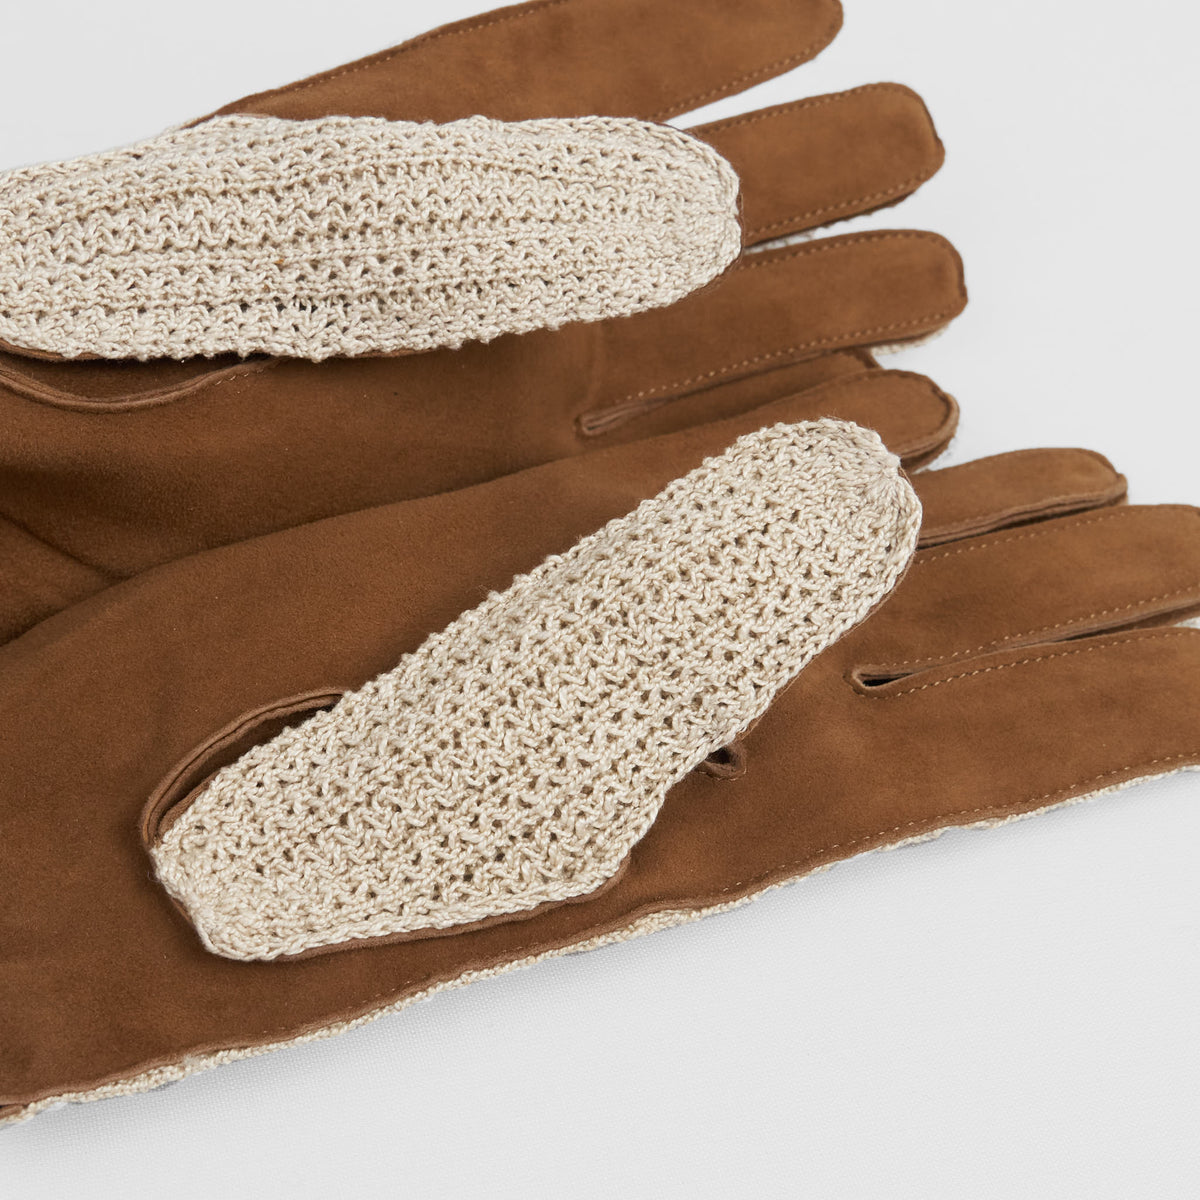 DeeCee style Leather and Cotton Hand Crafted Crochet Gloves